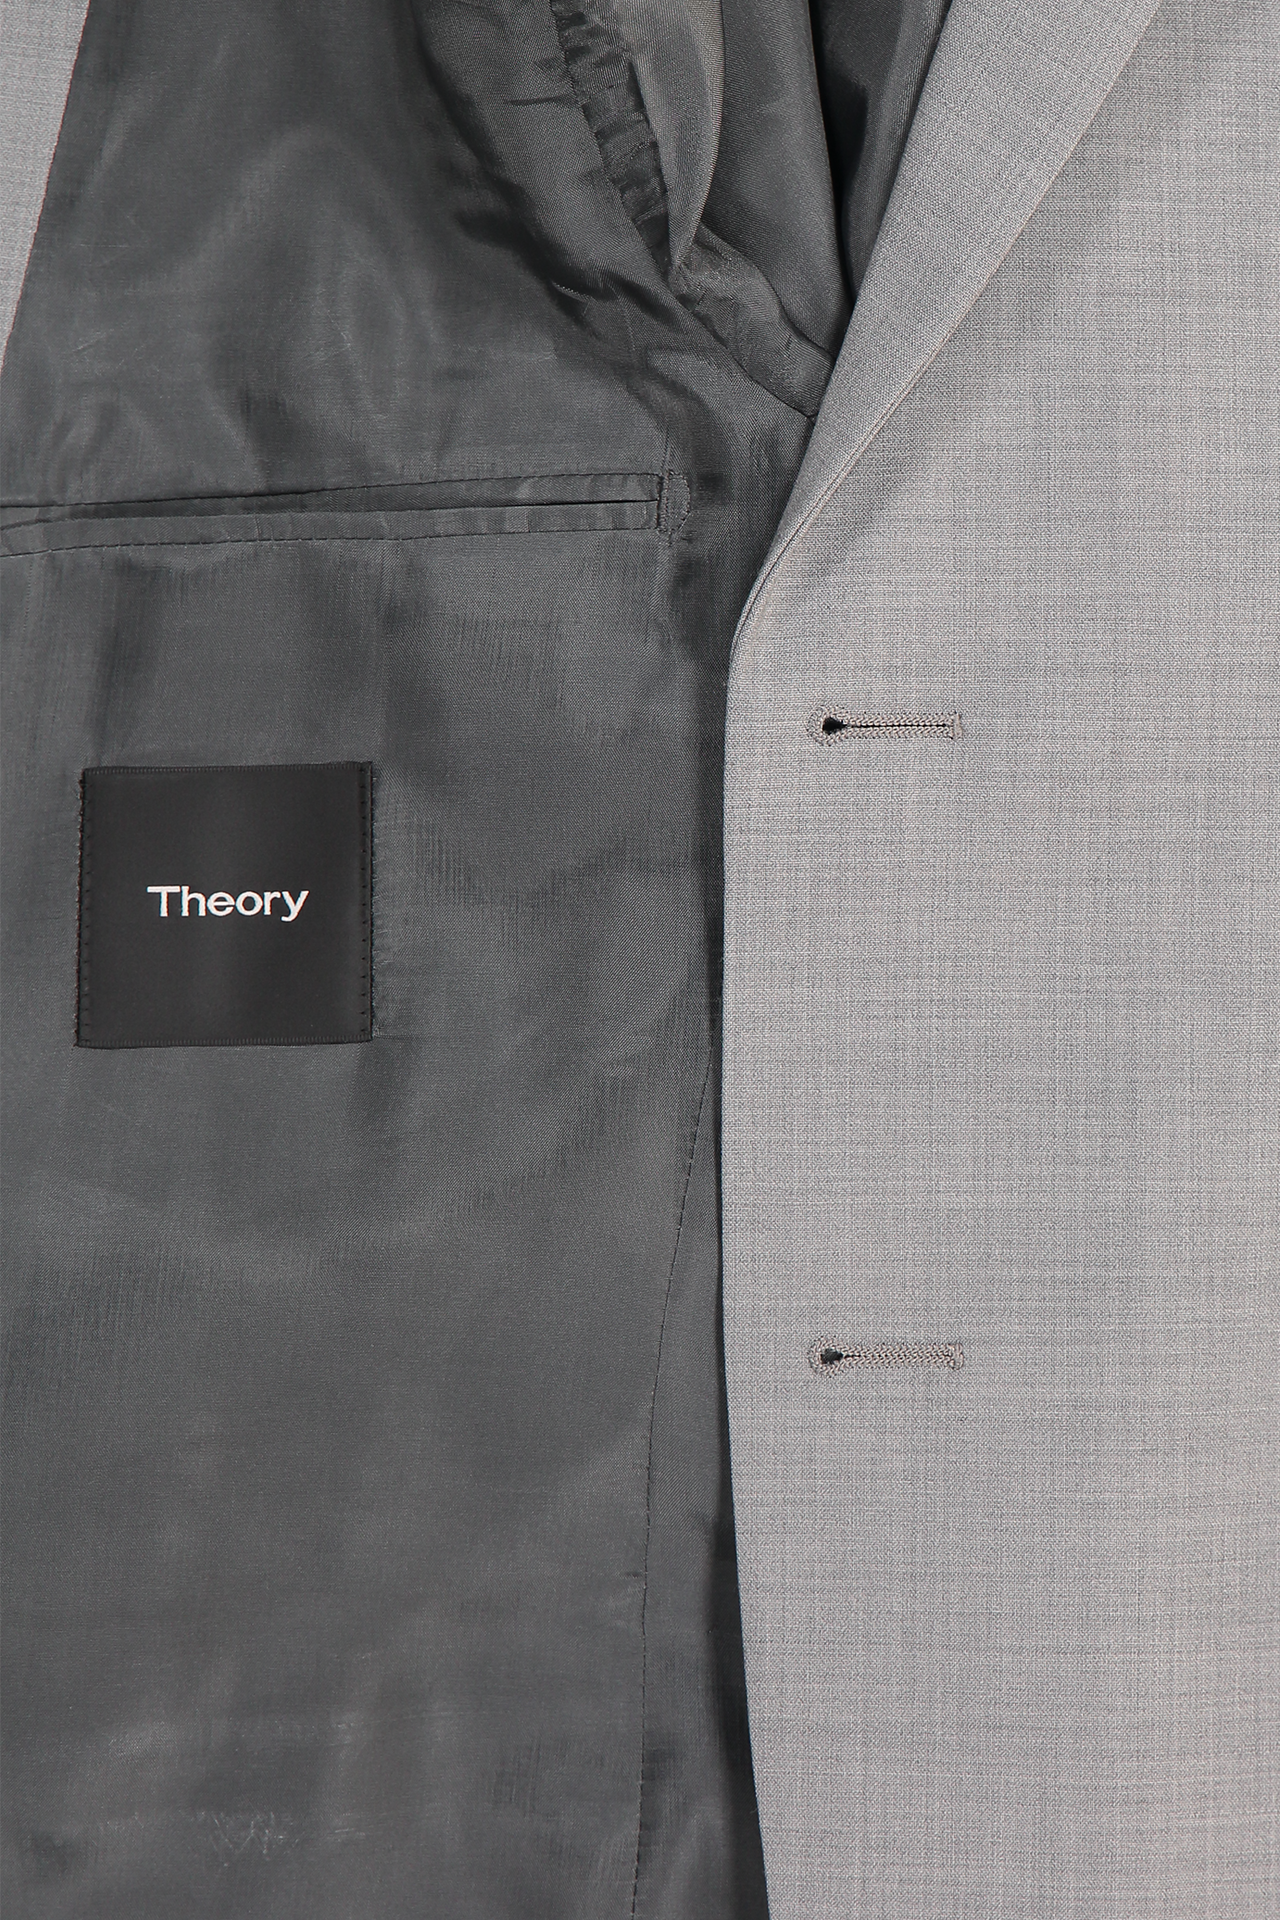 Theory Chambers New Tailor Suit Jacket Grey Inside Detail Image (1737077260403)